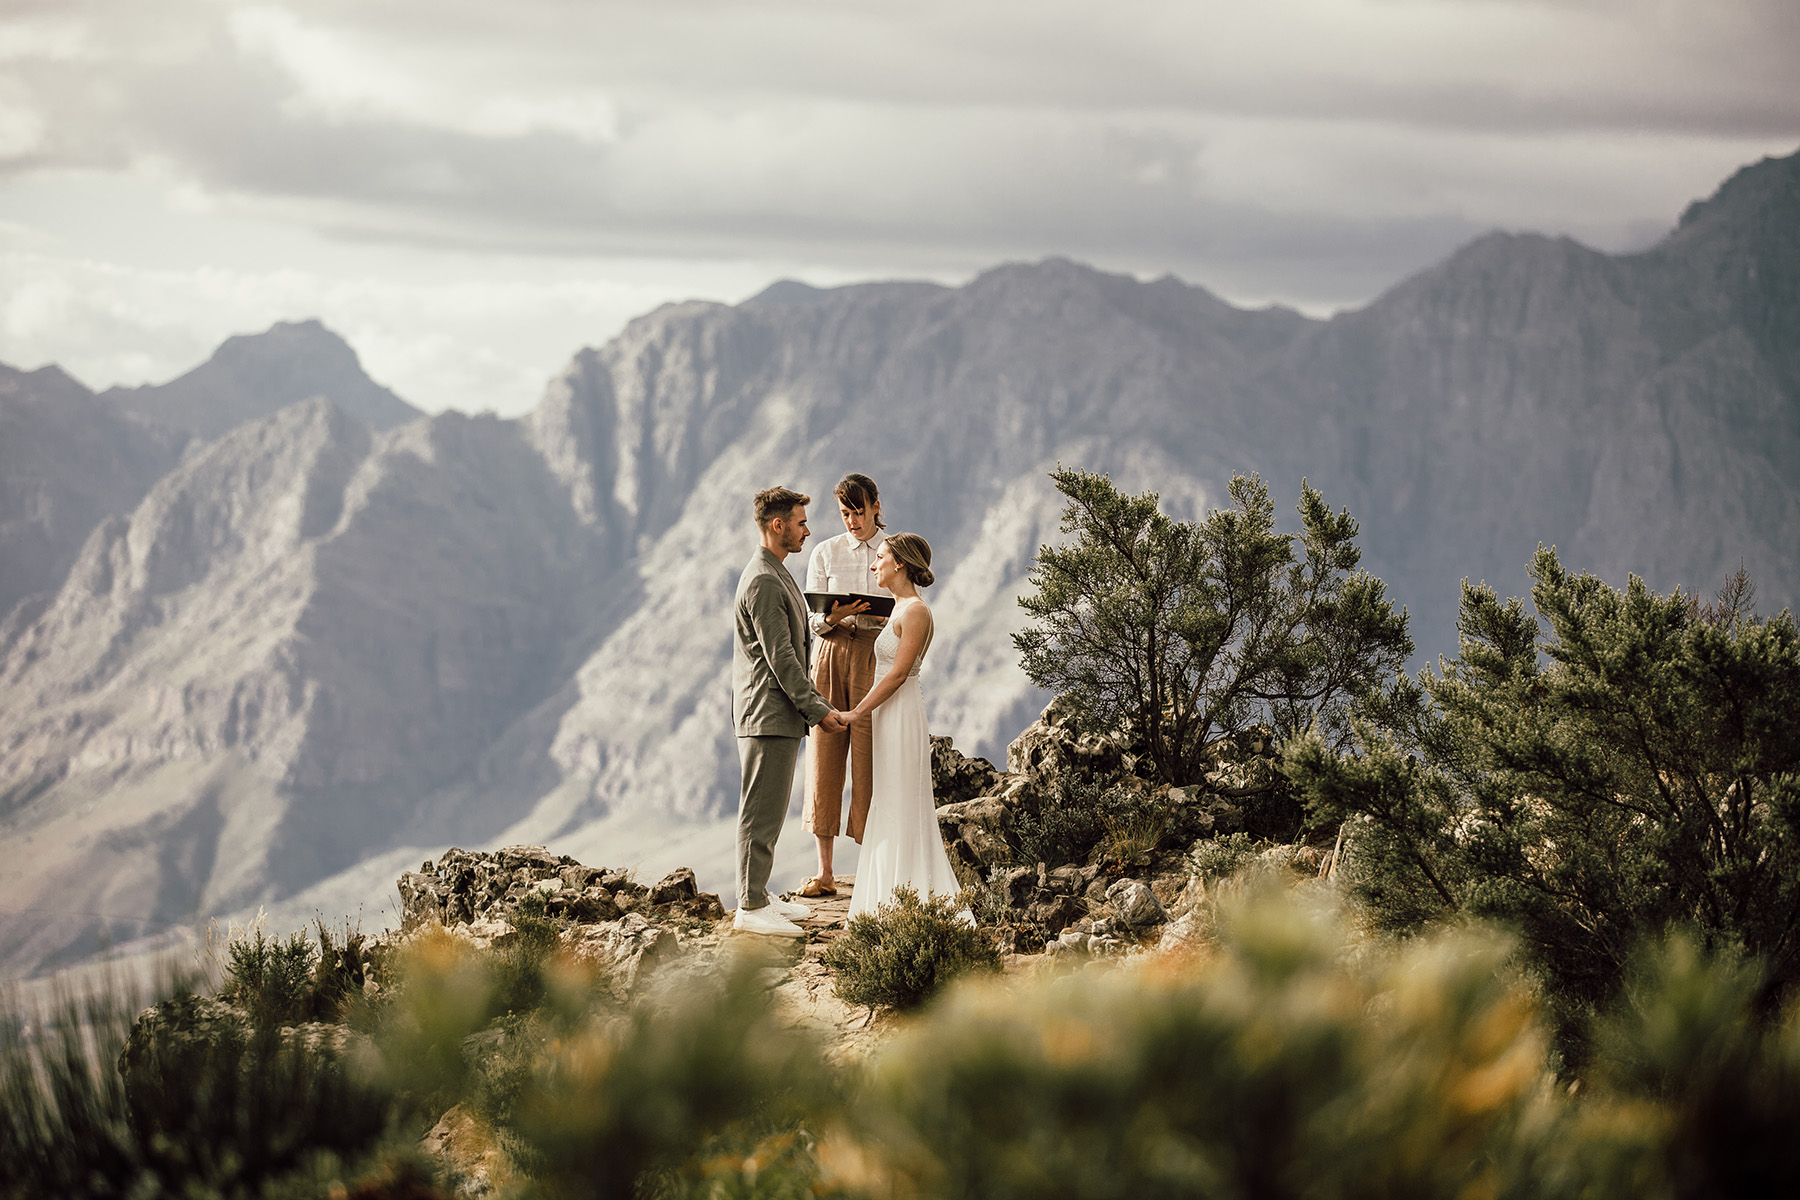 How to elope in South Africa